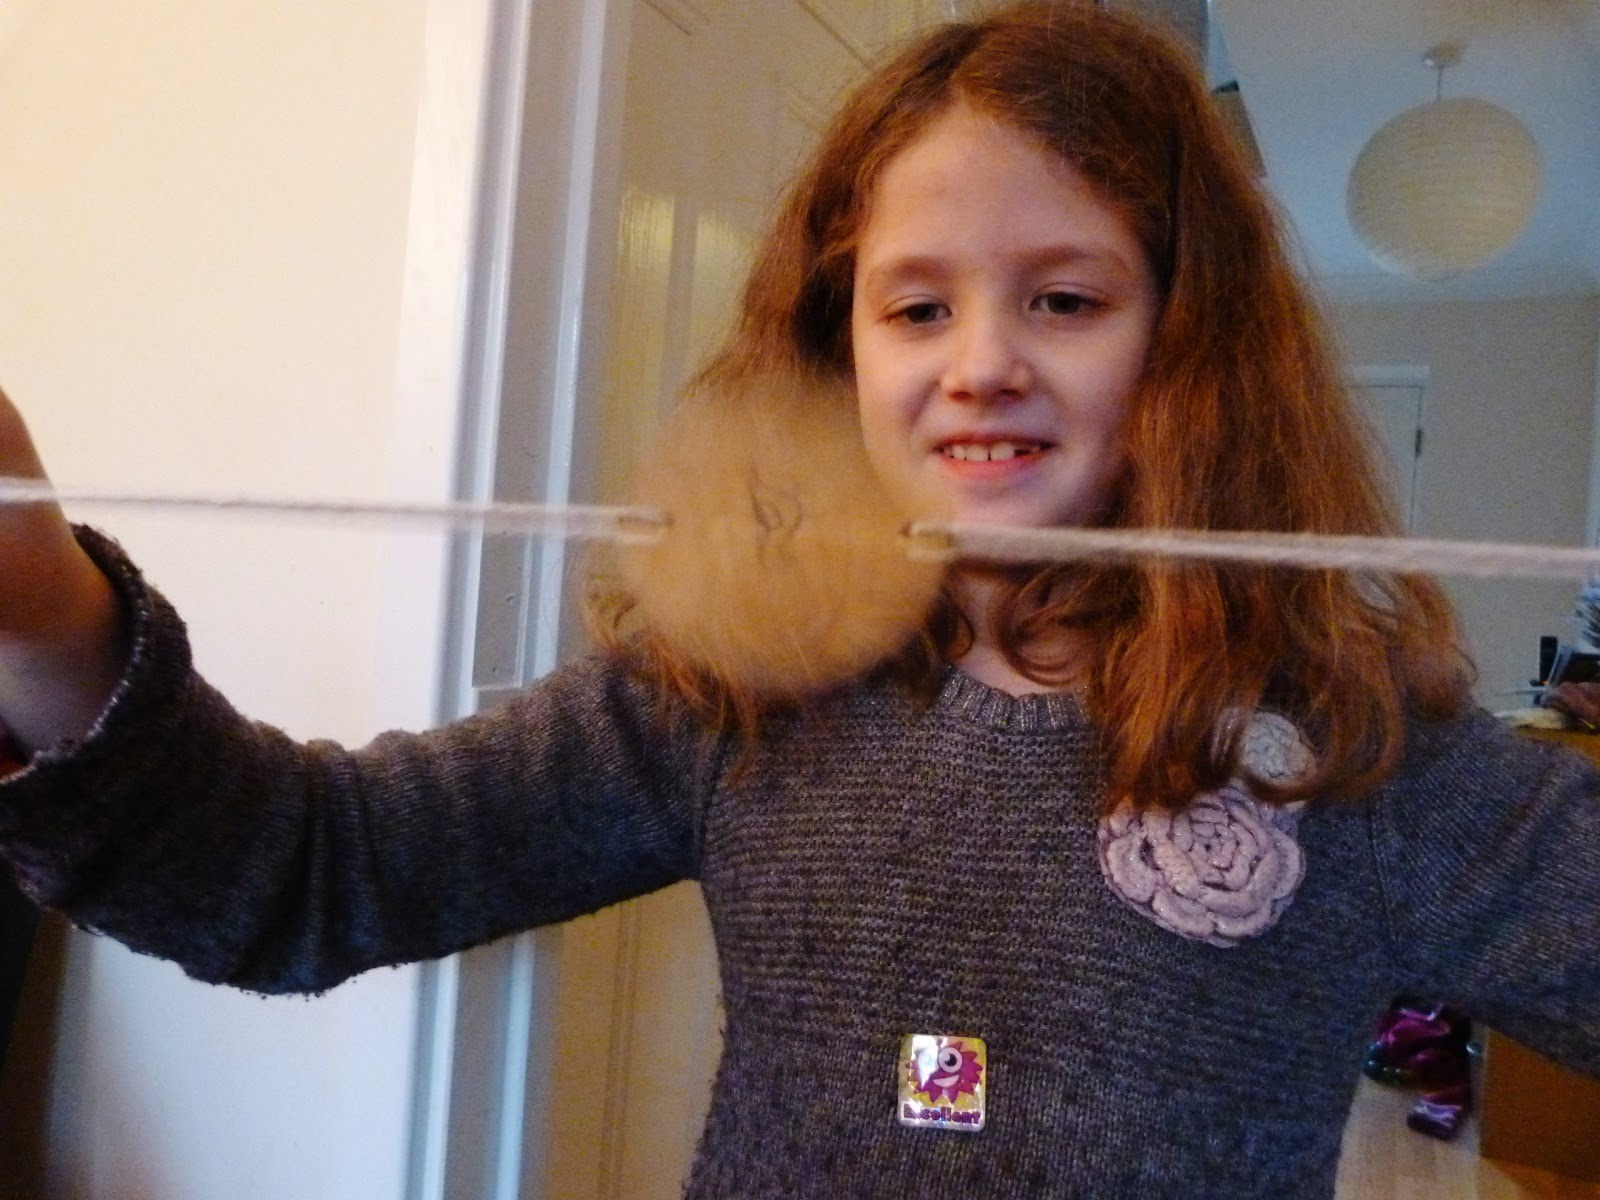 It’s a Thaumatrope and it makesfor a great science toy as it teaches ...